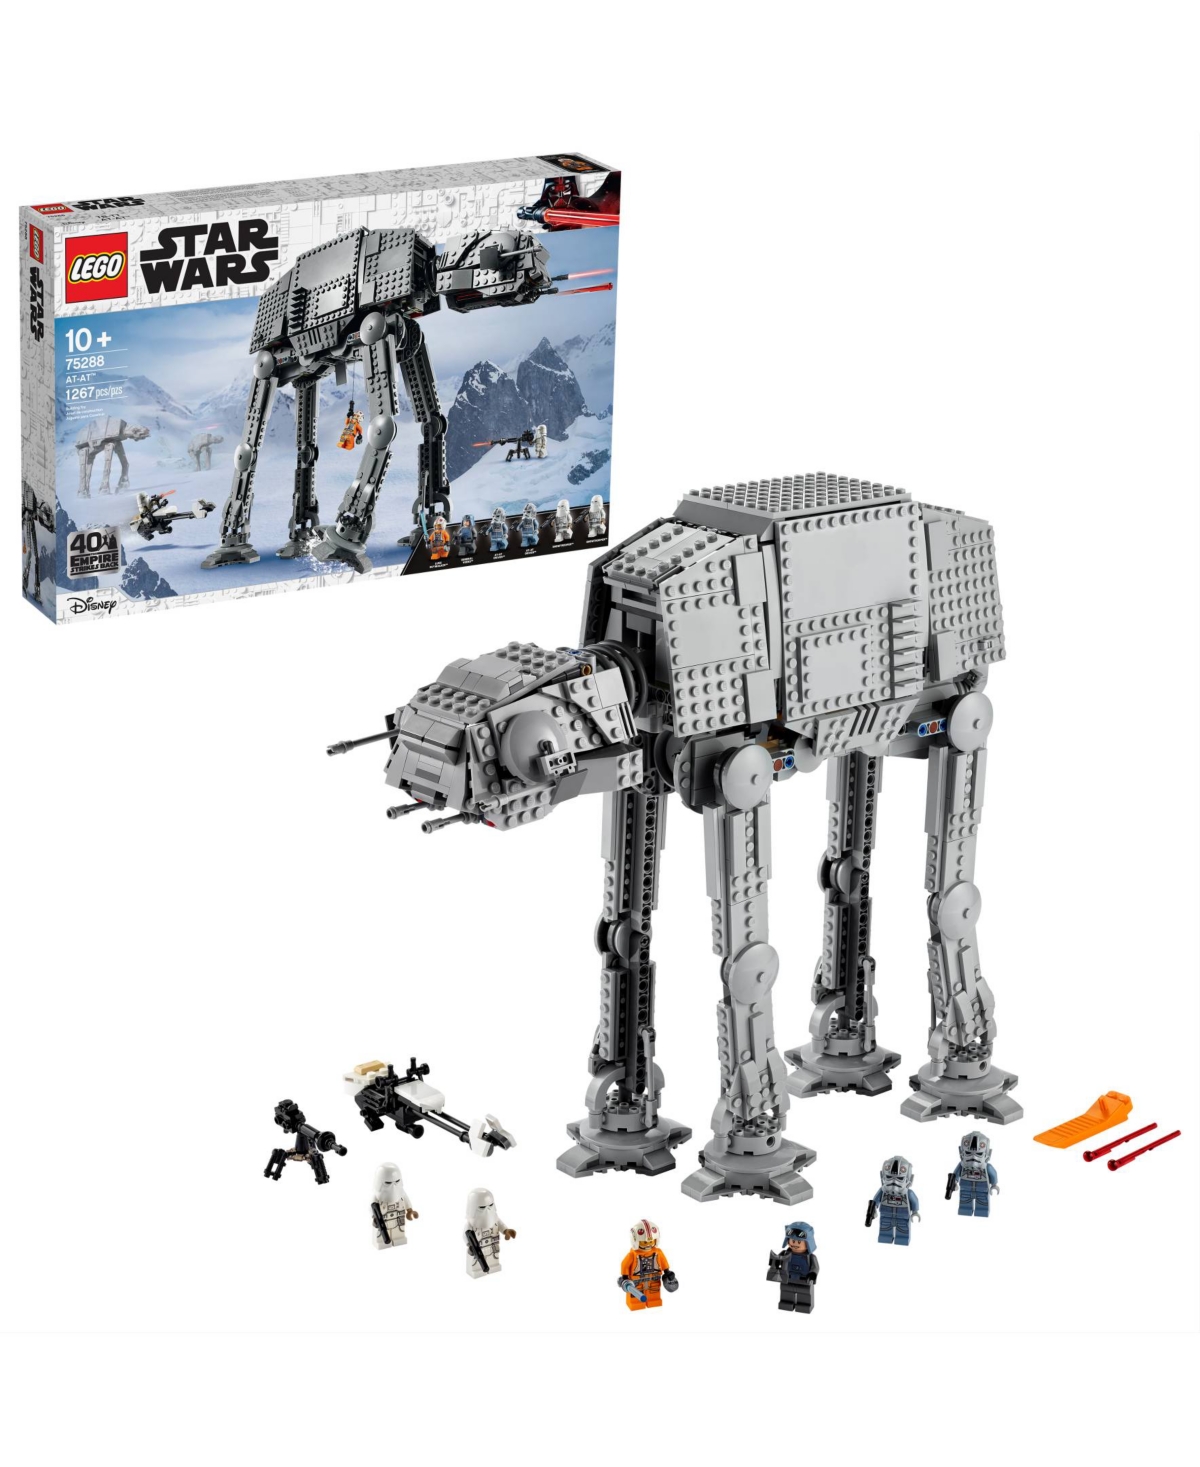 LEGO Star Wars AT-AT Building Kit, Awesome AT-AT Walker Building Toy for Creative Play 75288